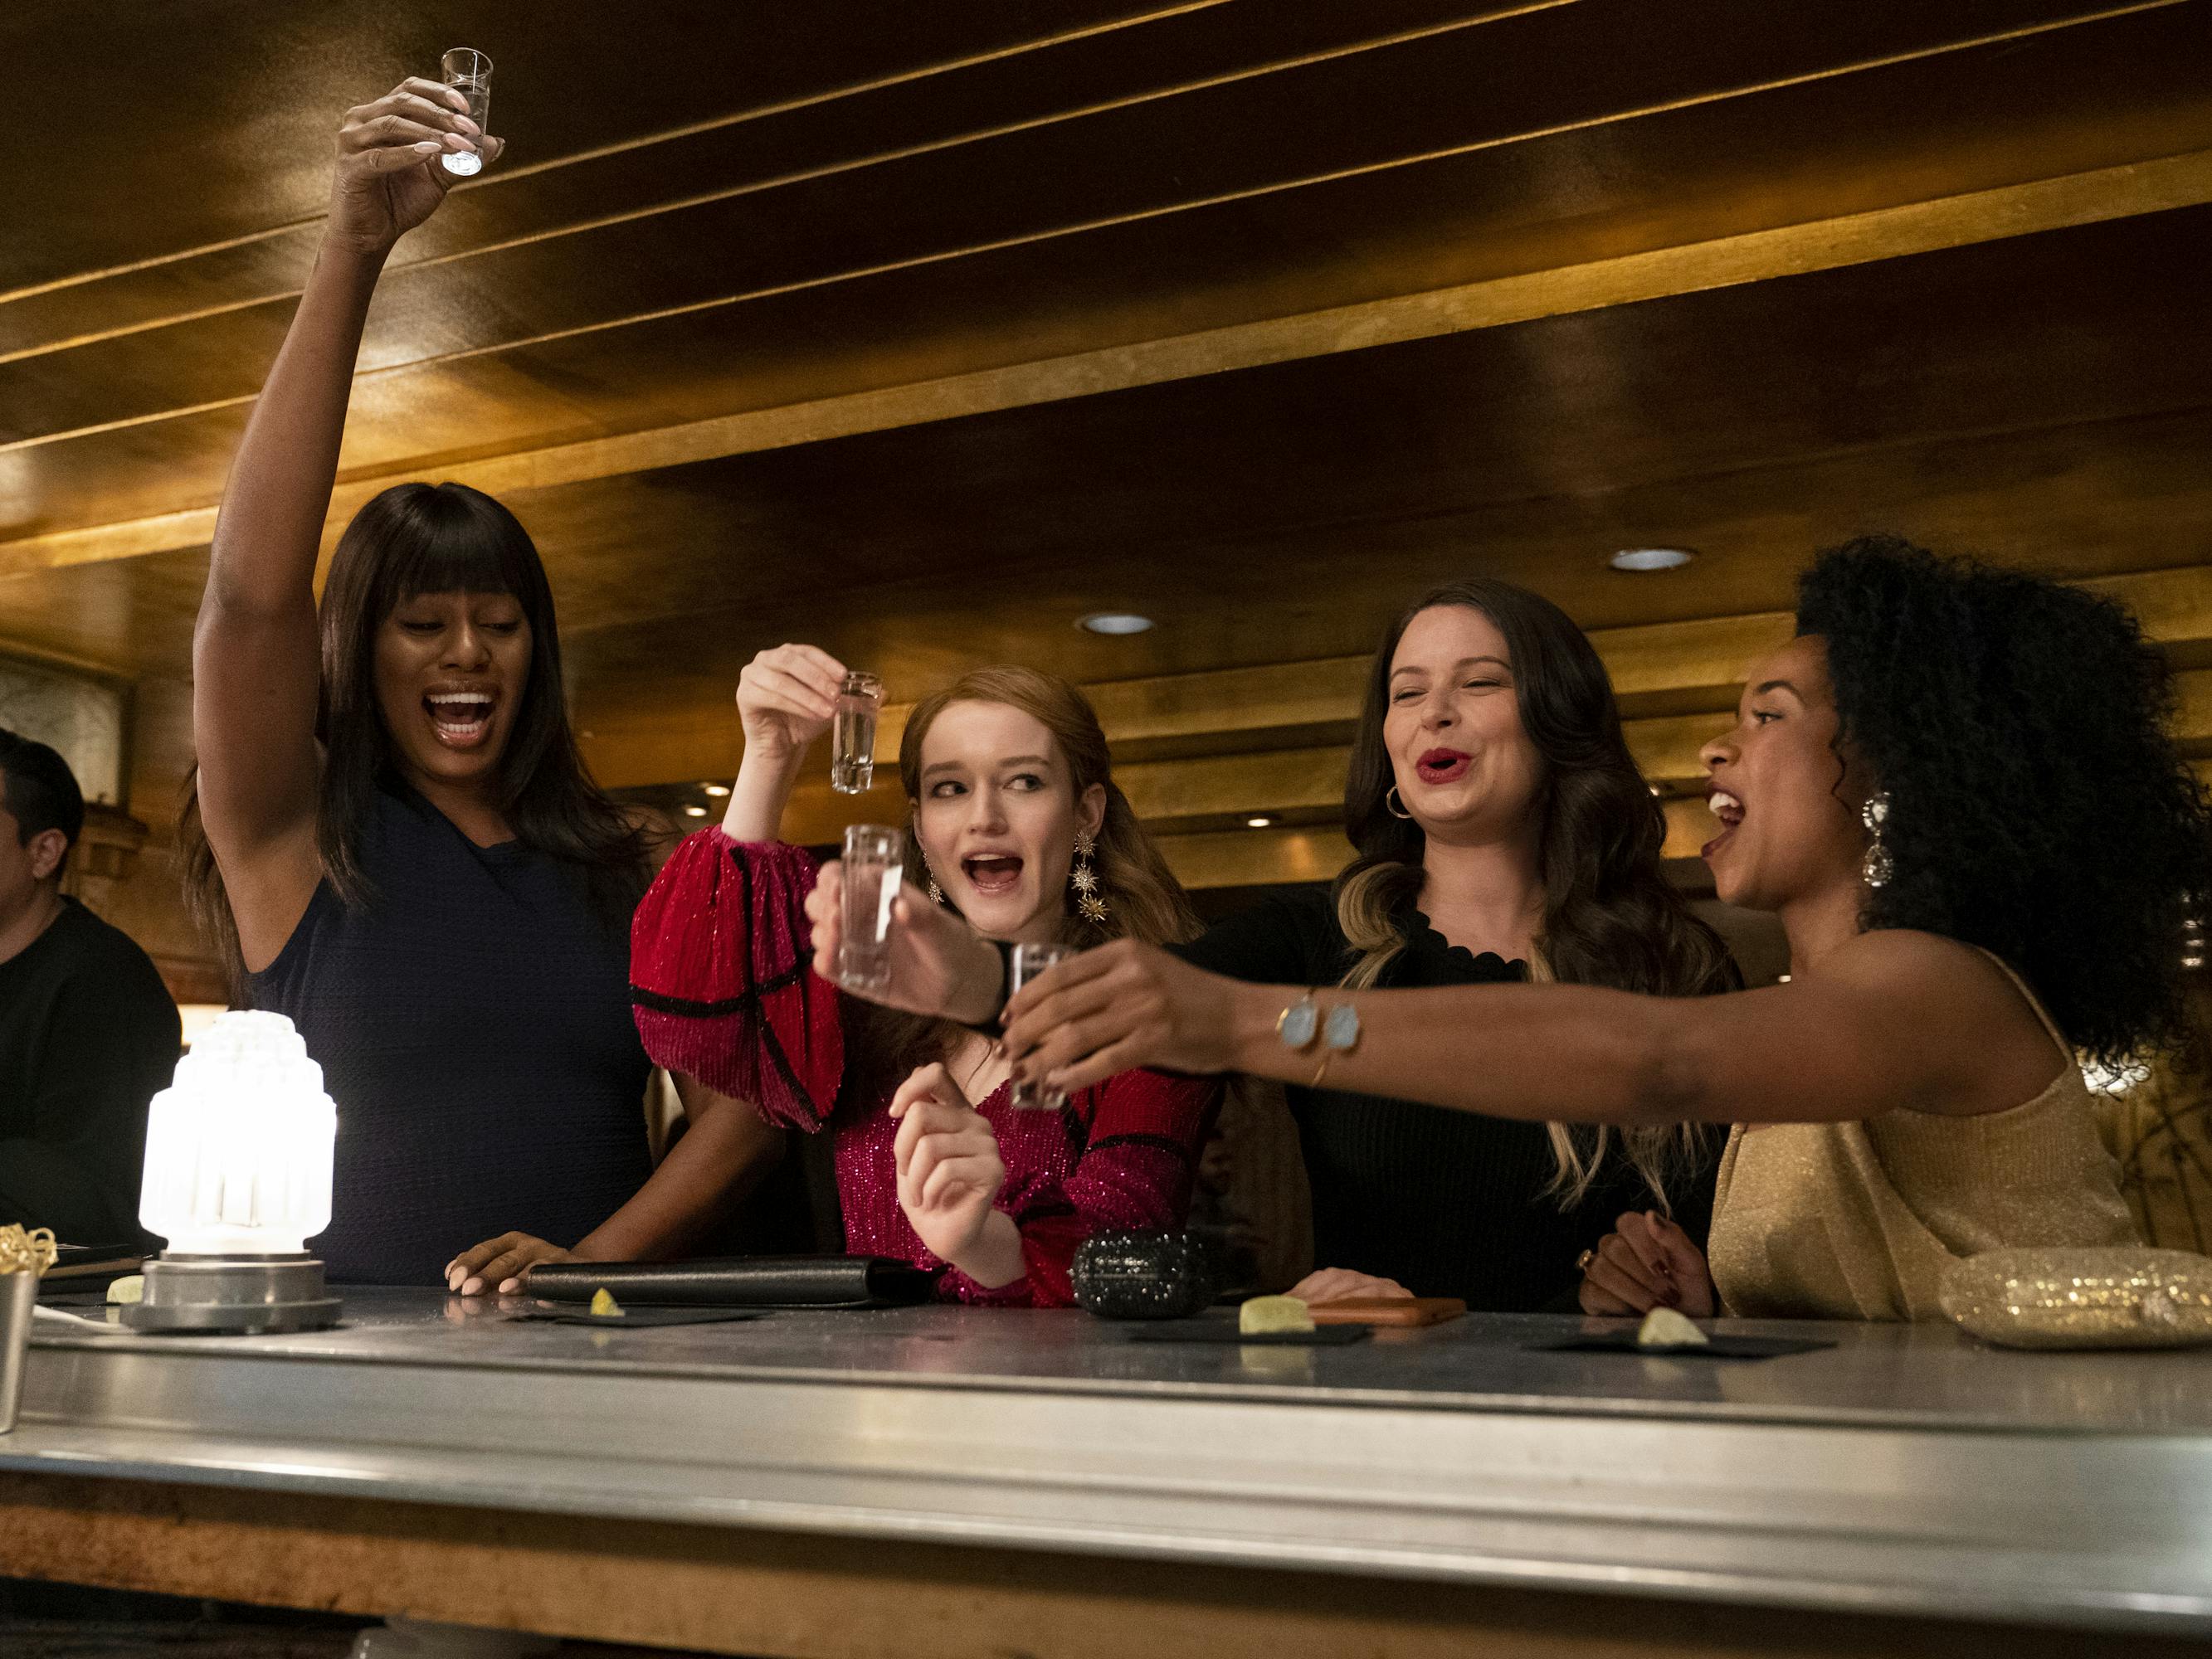 Kacy (Laverne Cox), Anna Delvey (Julia Garner), Rachel (Katie Lowes), and Neff (Alexis Floyd) take shots at a dimly lit bar. Cox wears a black dress, Garner wears red, Lowes wears a black gauzy top, and Floyd wears a cream top with matching clutch.